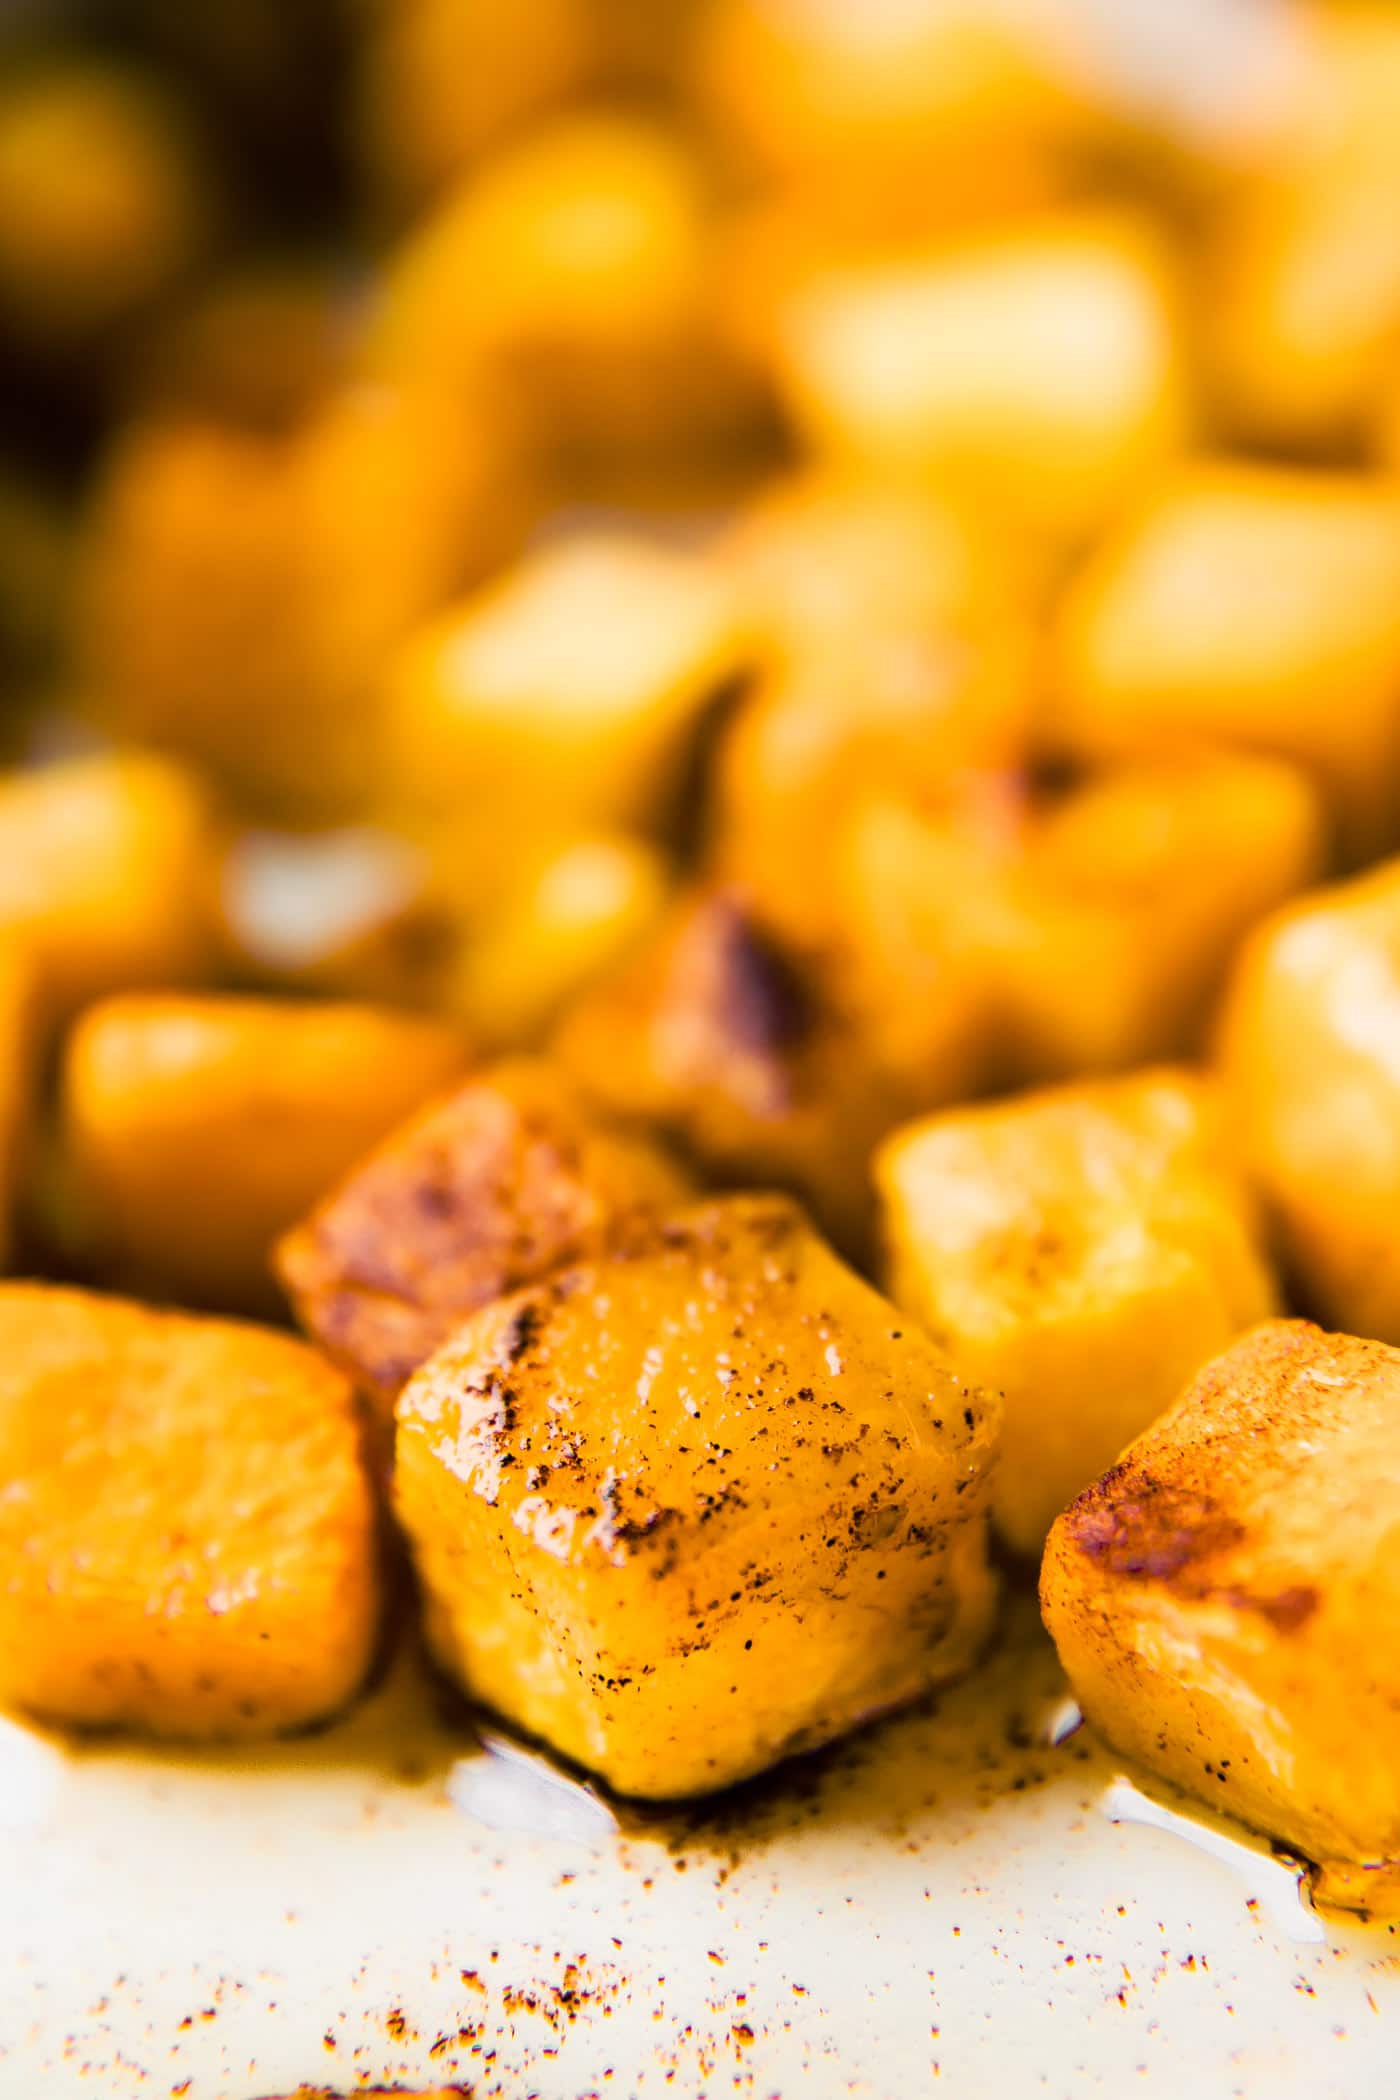 Roasted butternut squash pieces with dusting of cinnamon